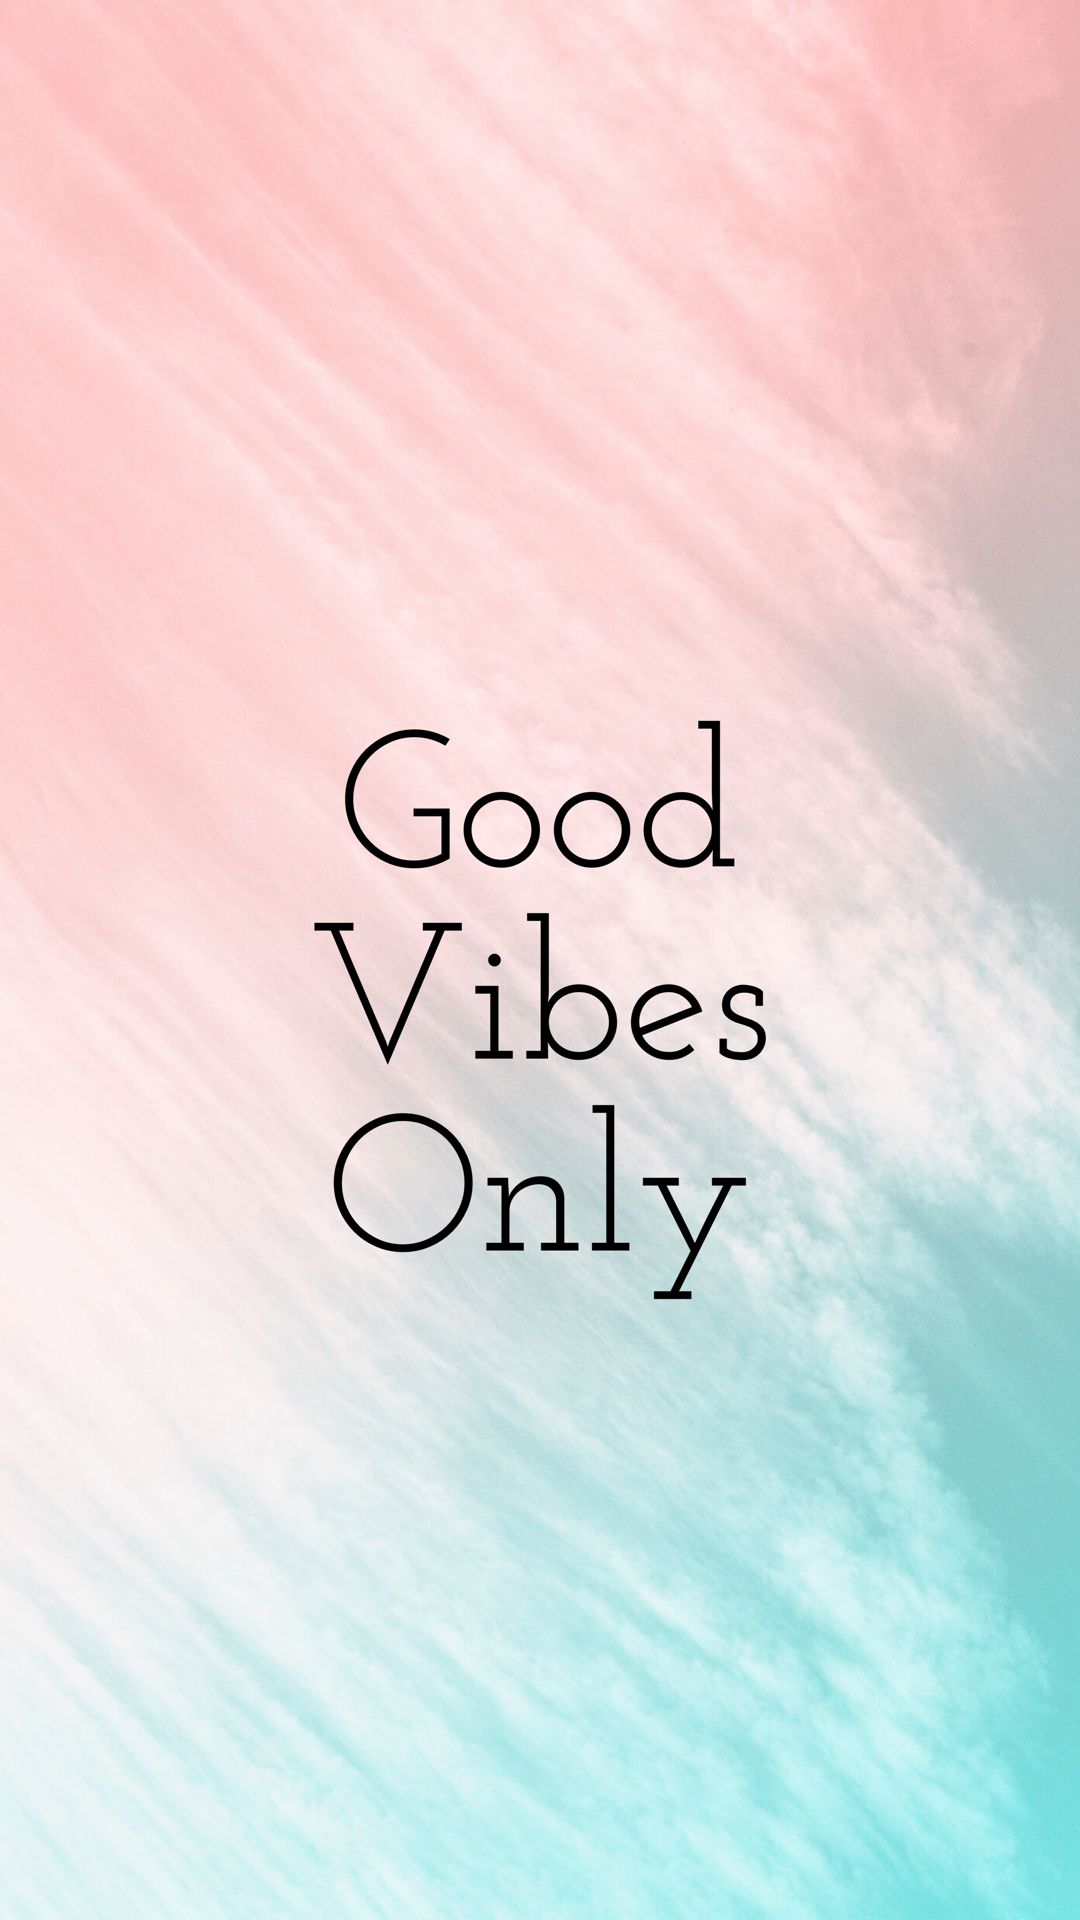 Best “Good vides only“ ideas. good vibes only, good vibes wallpaper, good vibes